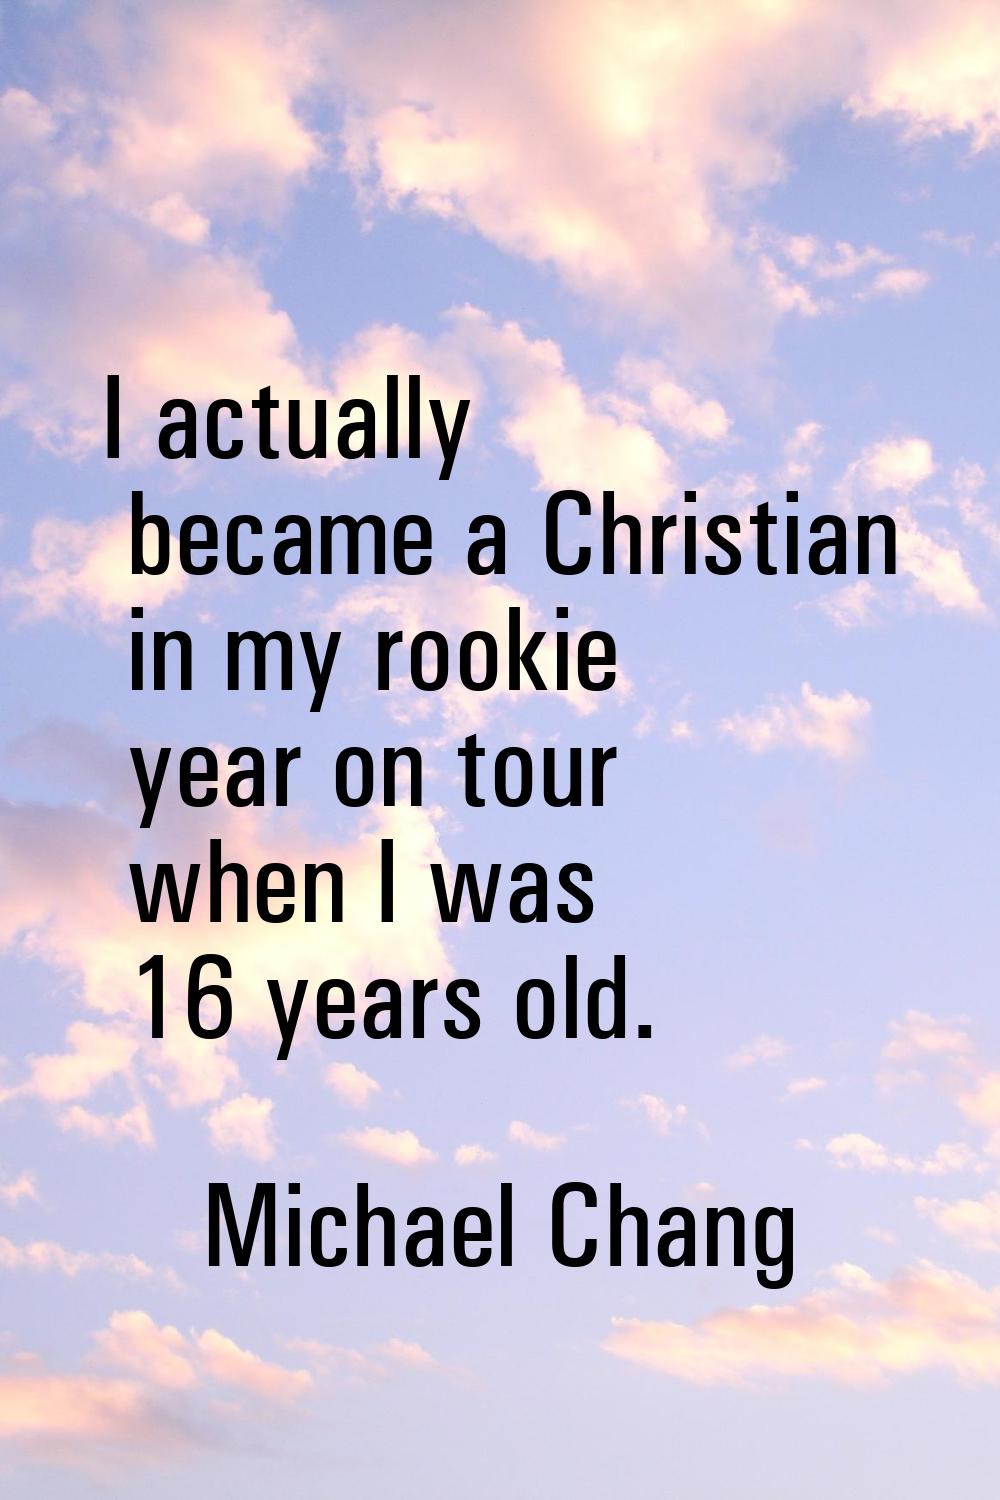 I actually became a Christian in my rookie year on tour when I was 16 years old.